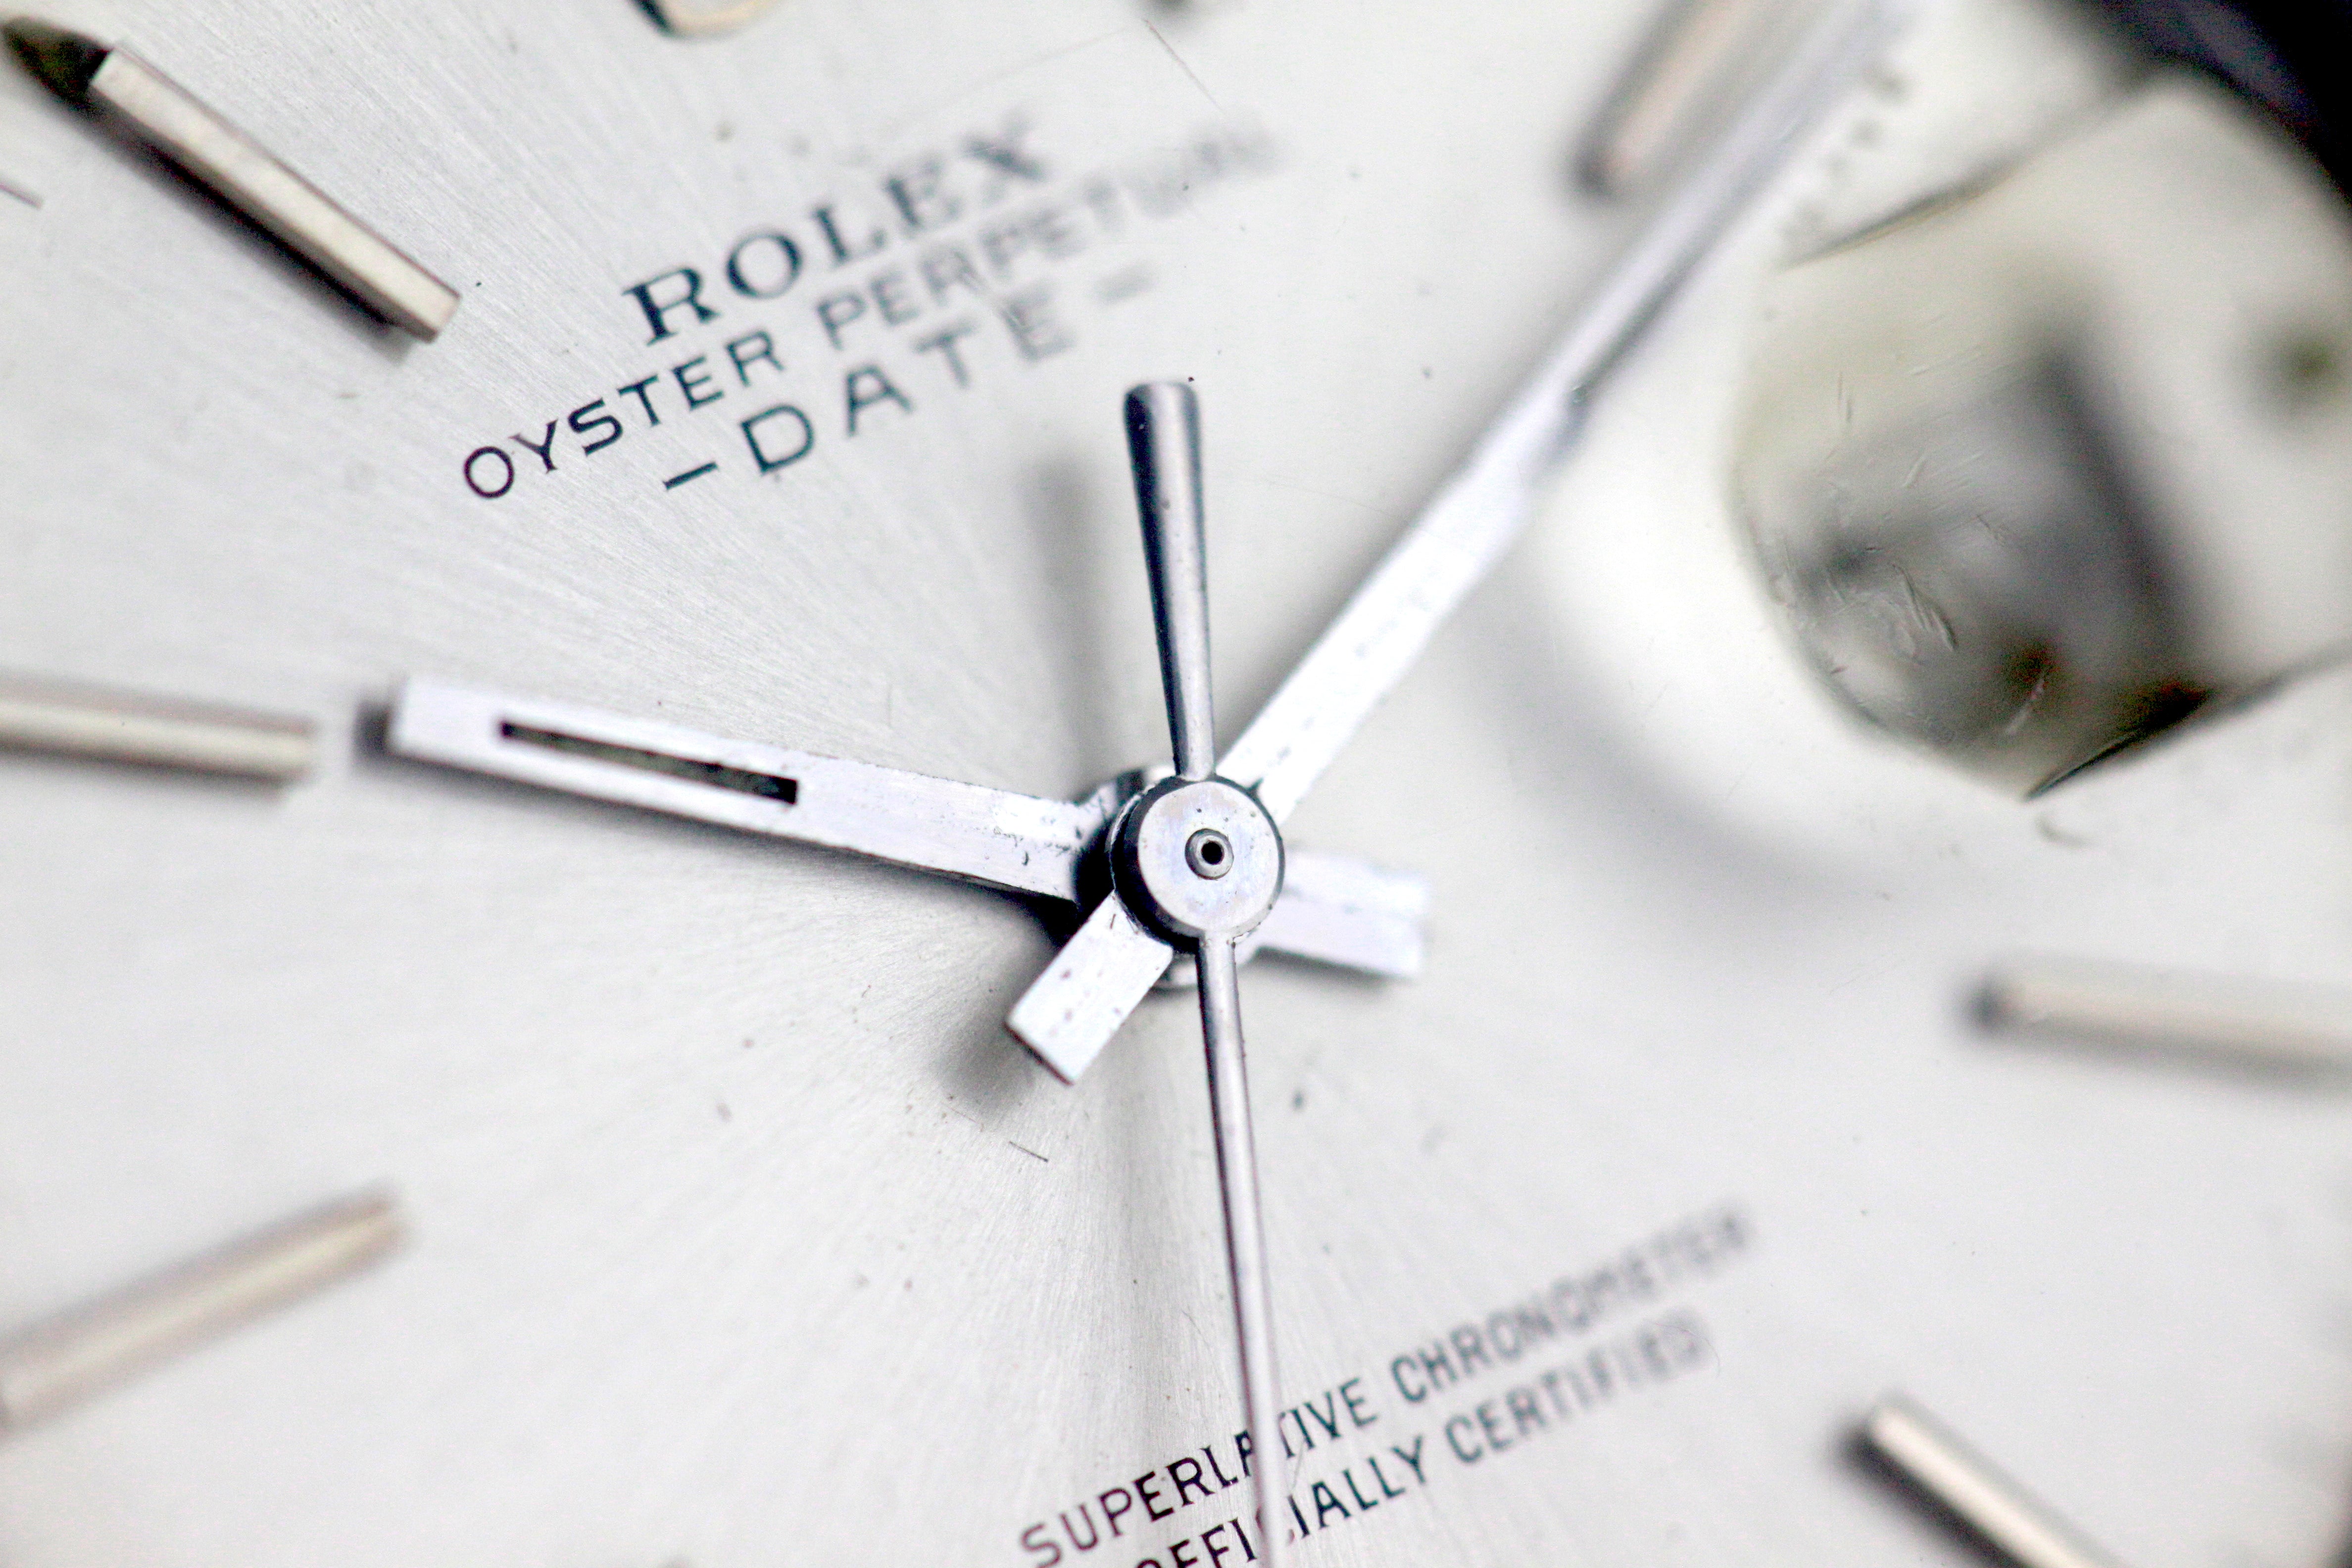 Rolex Date Champagne dial - ref 1500 from 1966